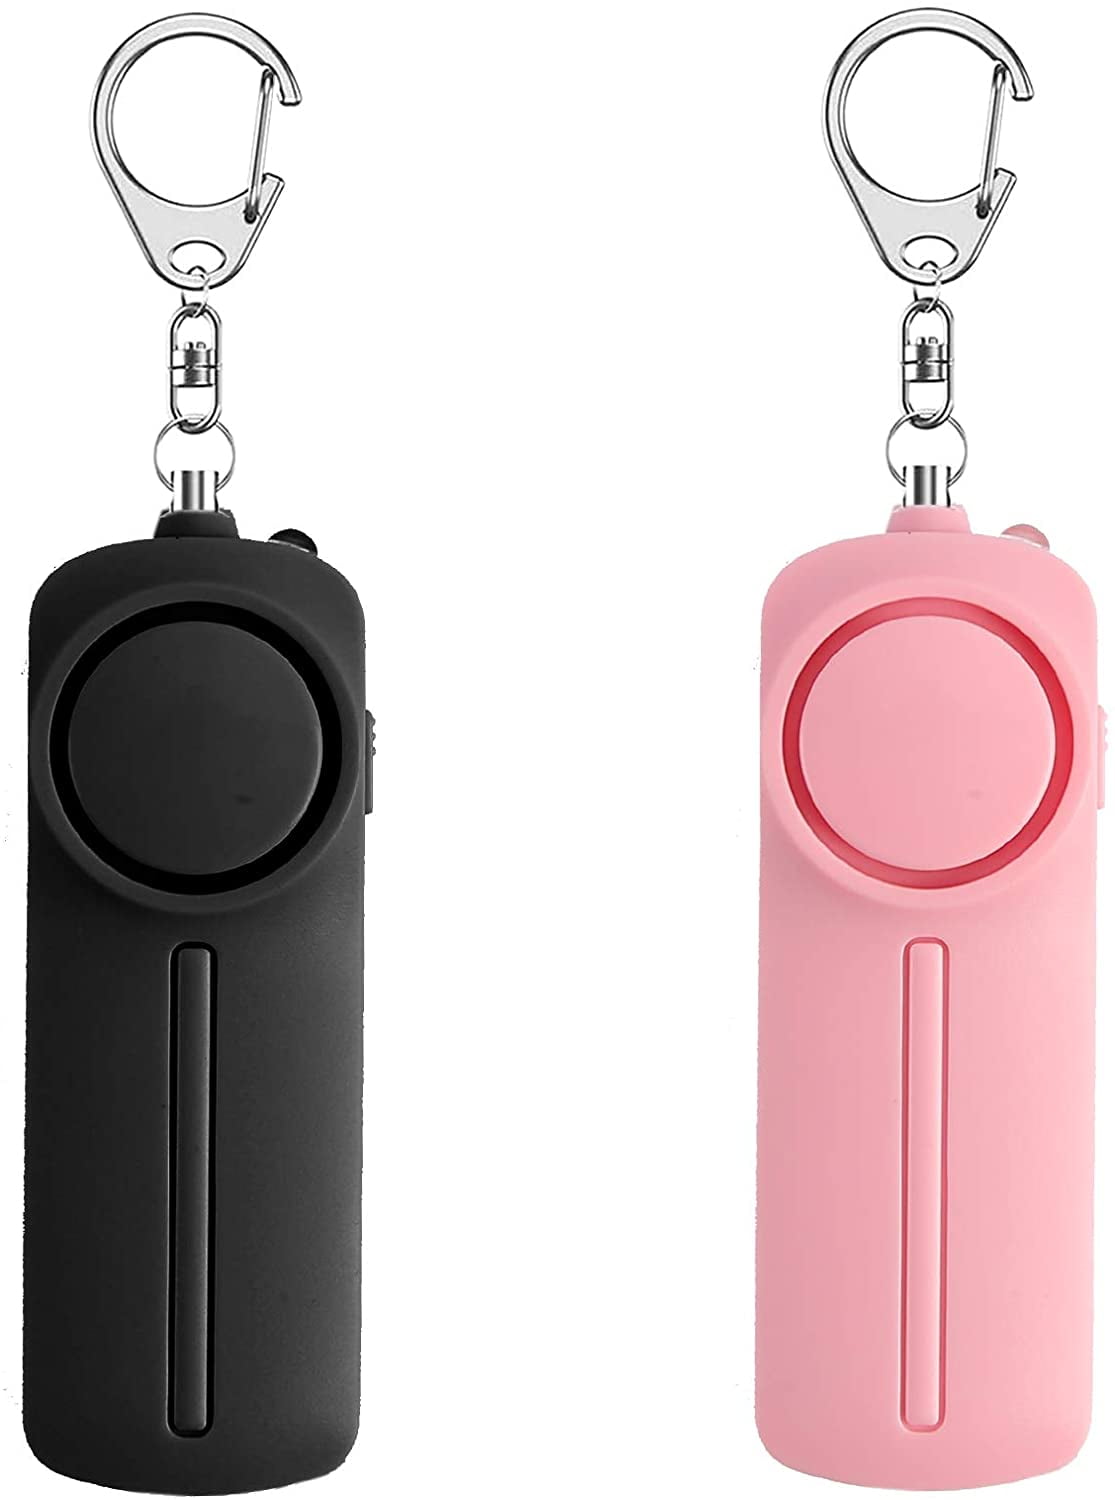 Personal Alarm Keychain with LED Light 130 dB 2* AAA batteries included. 